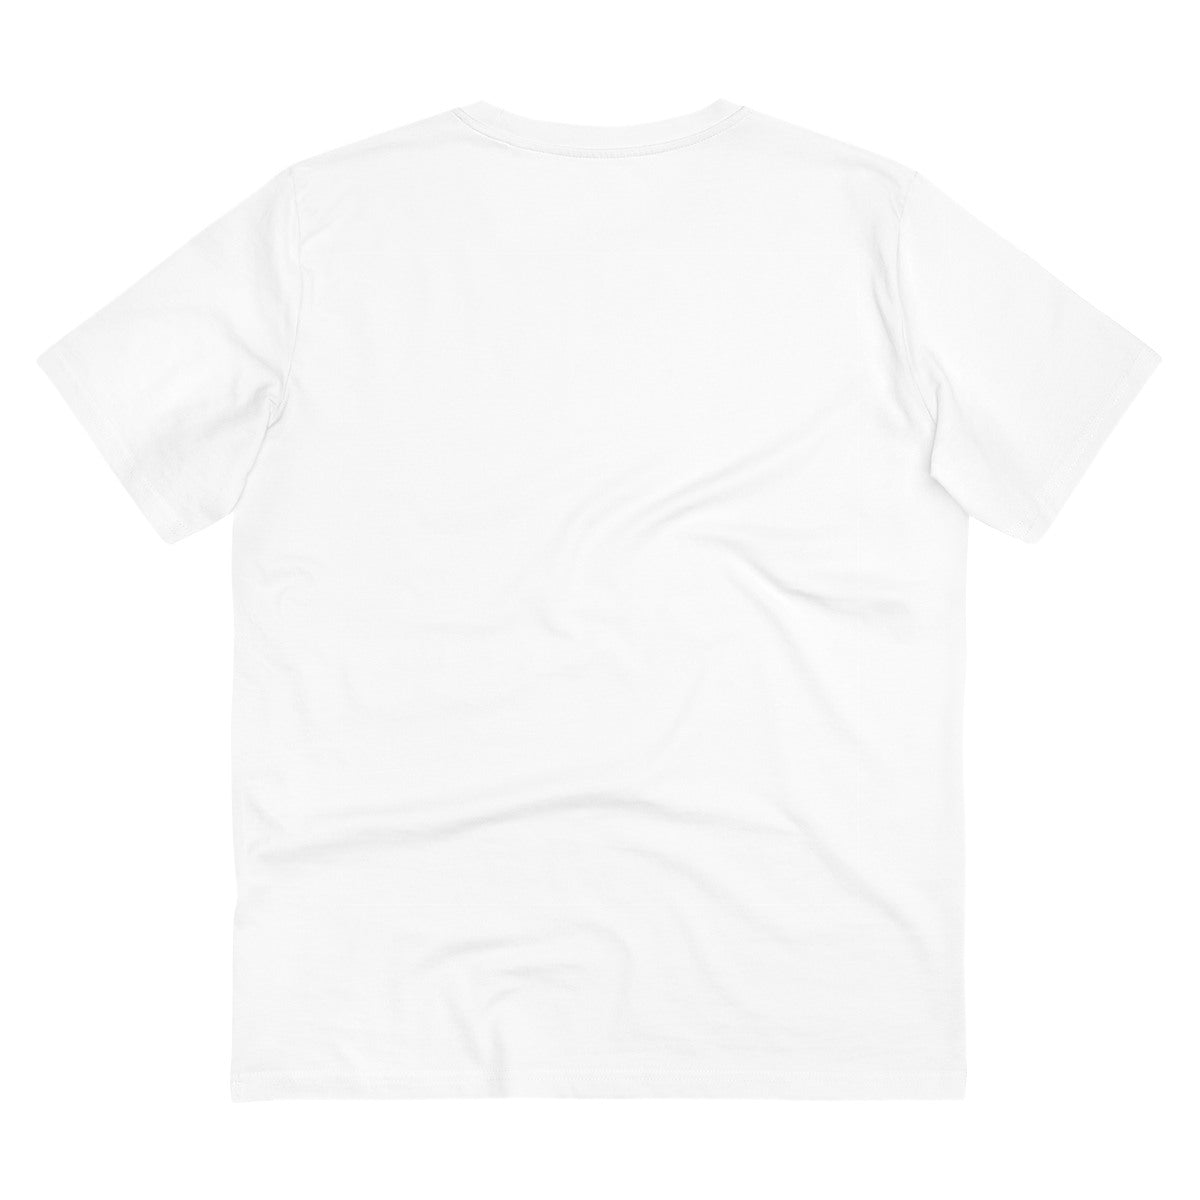 Men's PC Cotton 47th Anniversary Printed T Shirt (Color: White, Thread Count: 180GSM) - GillKart